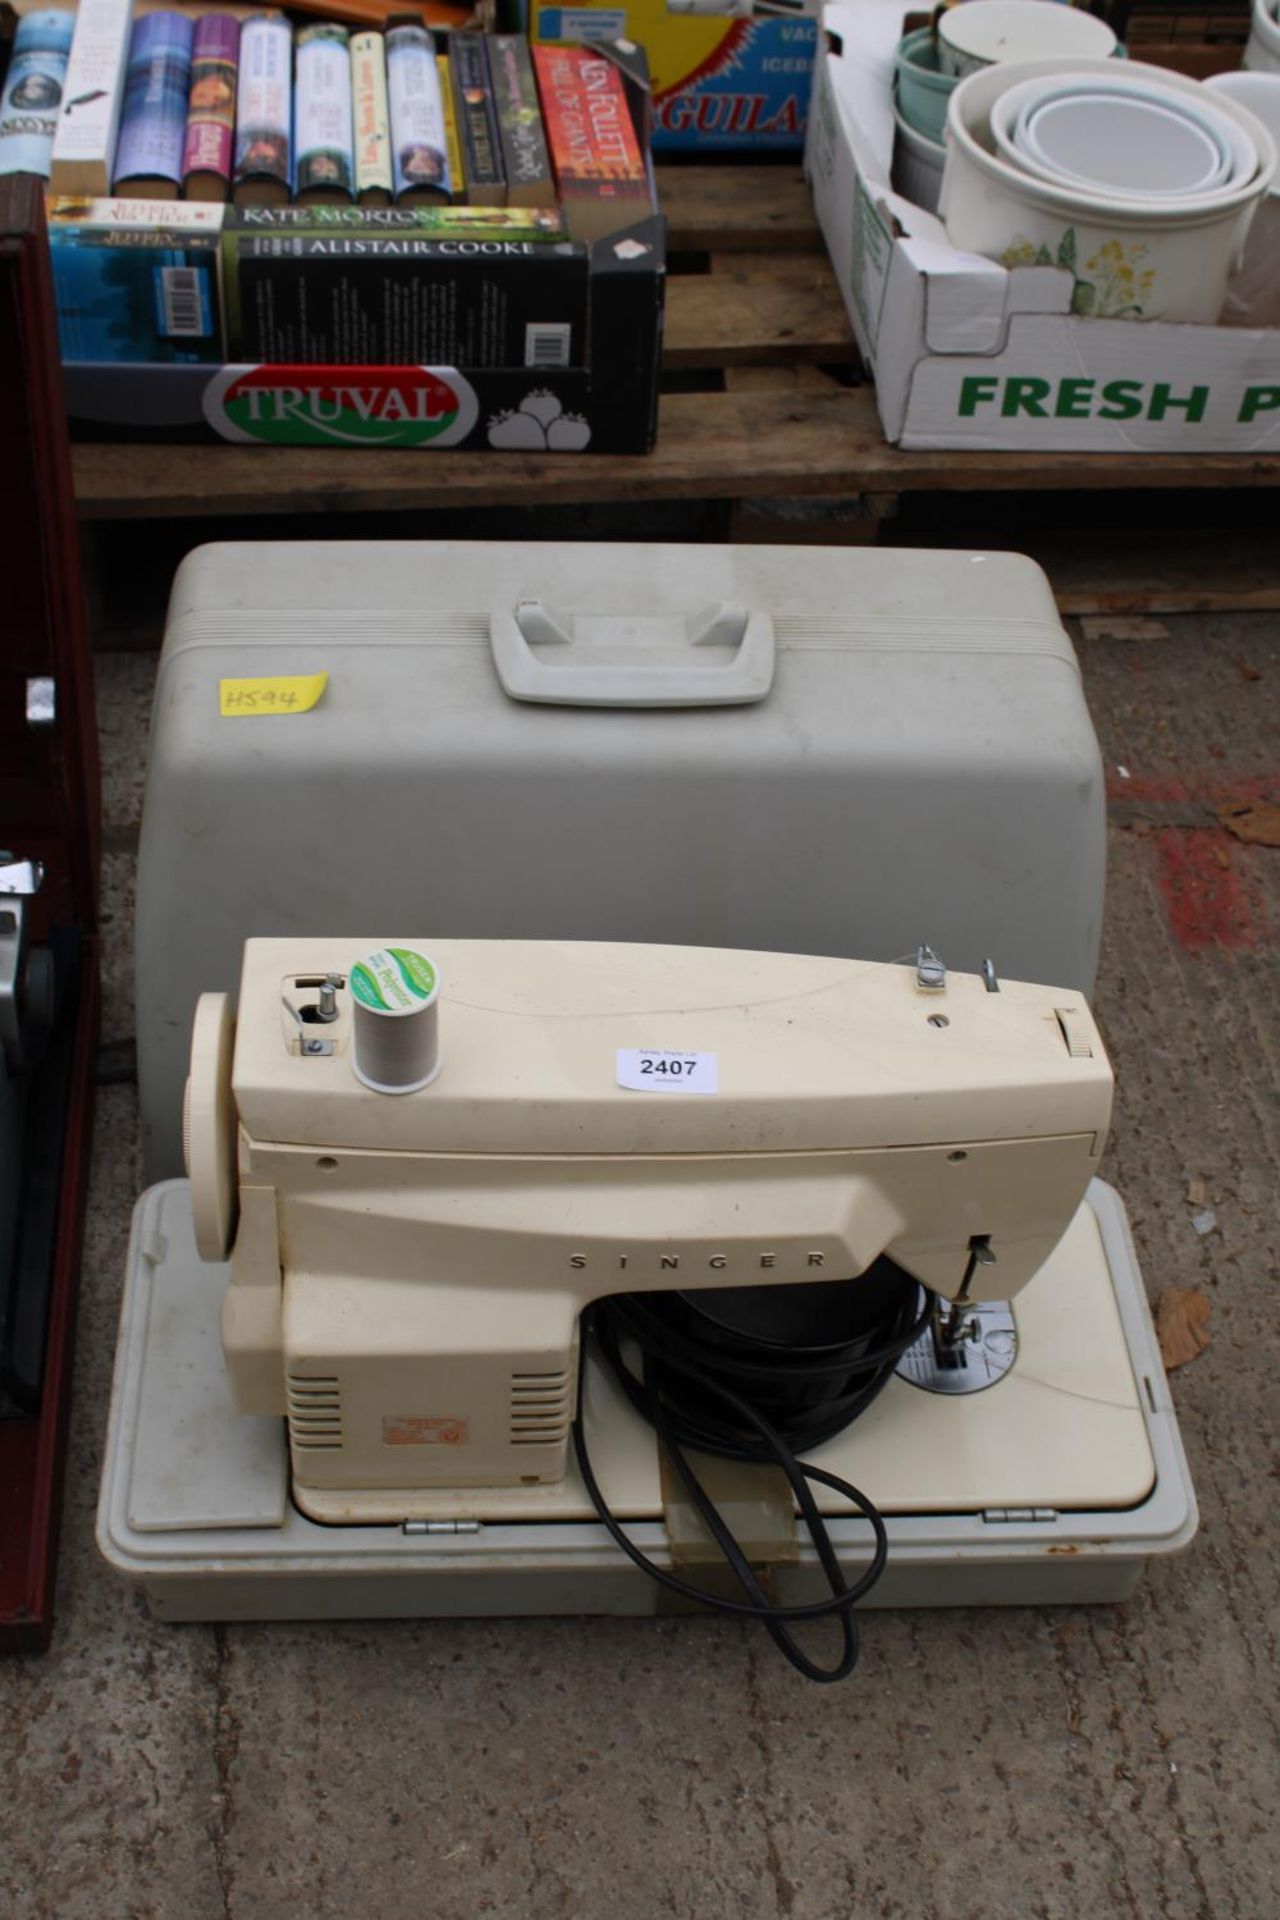 AN ELECTRIC SINGER SEWING MACHINE WITH FOOT PEDAL AND CARRY CASE